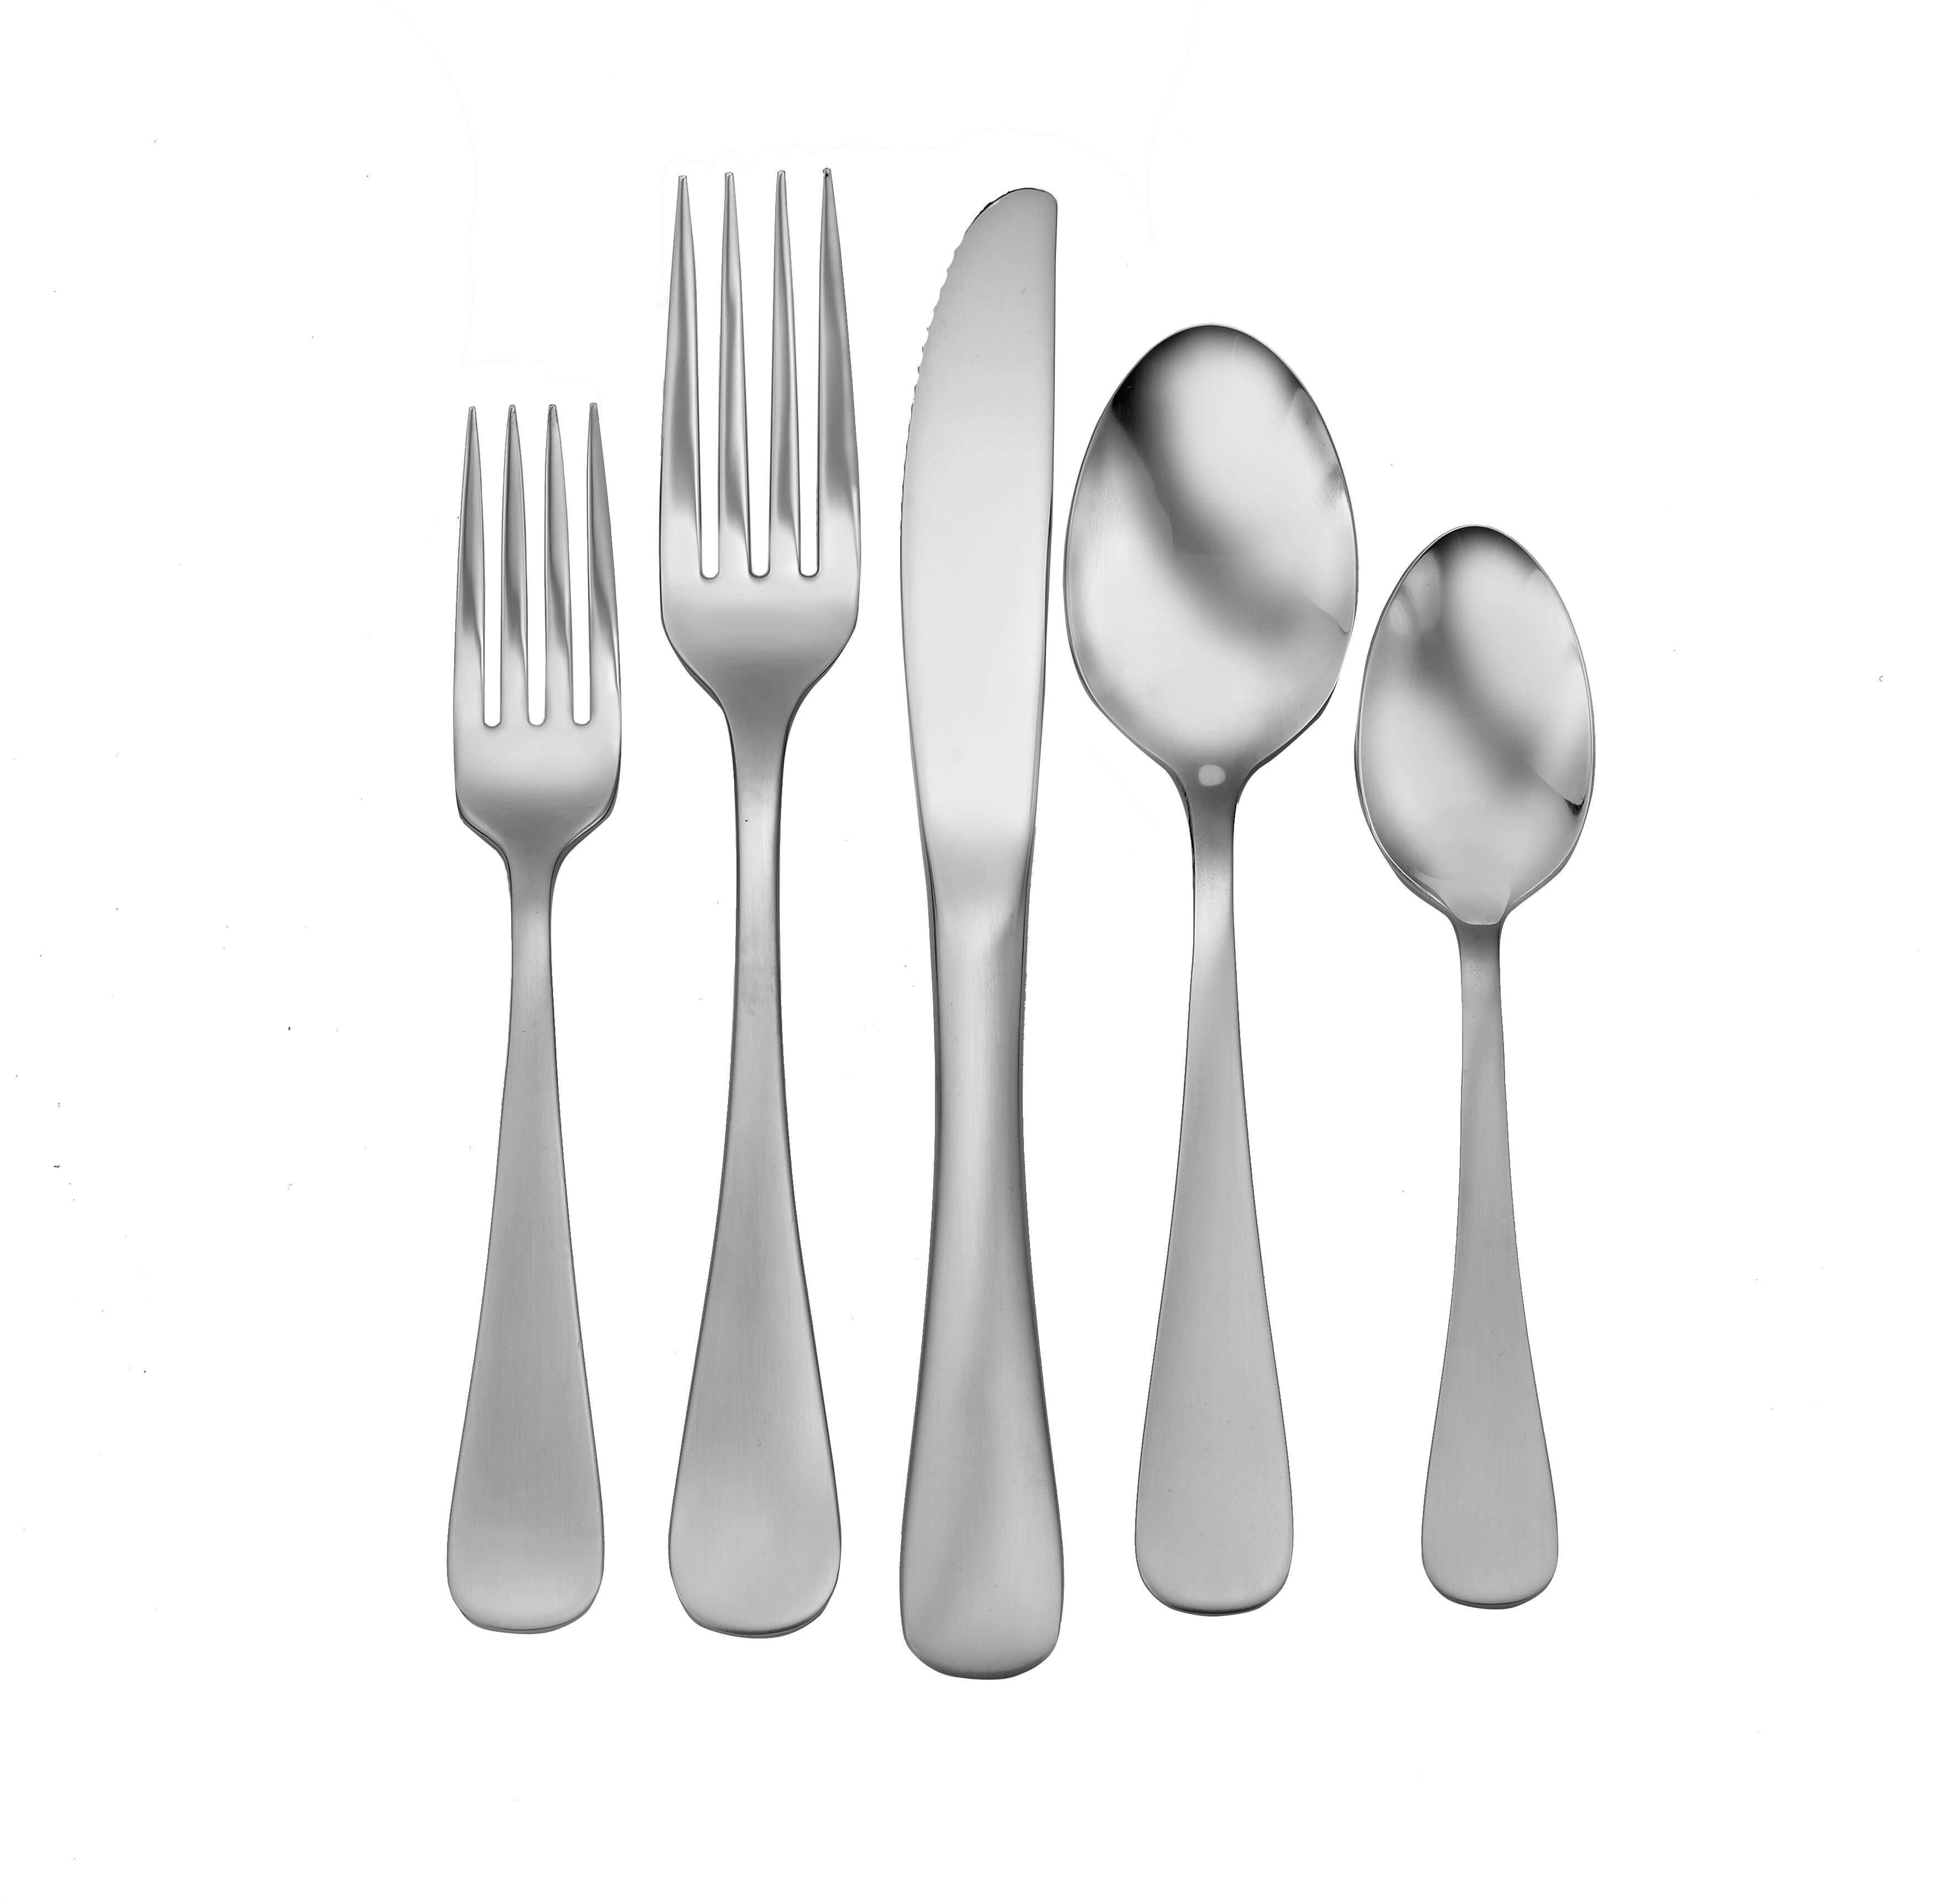 B Ross - Liberty Tabletop - The ONLY flatware Made in the USA